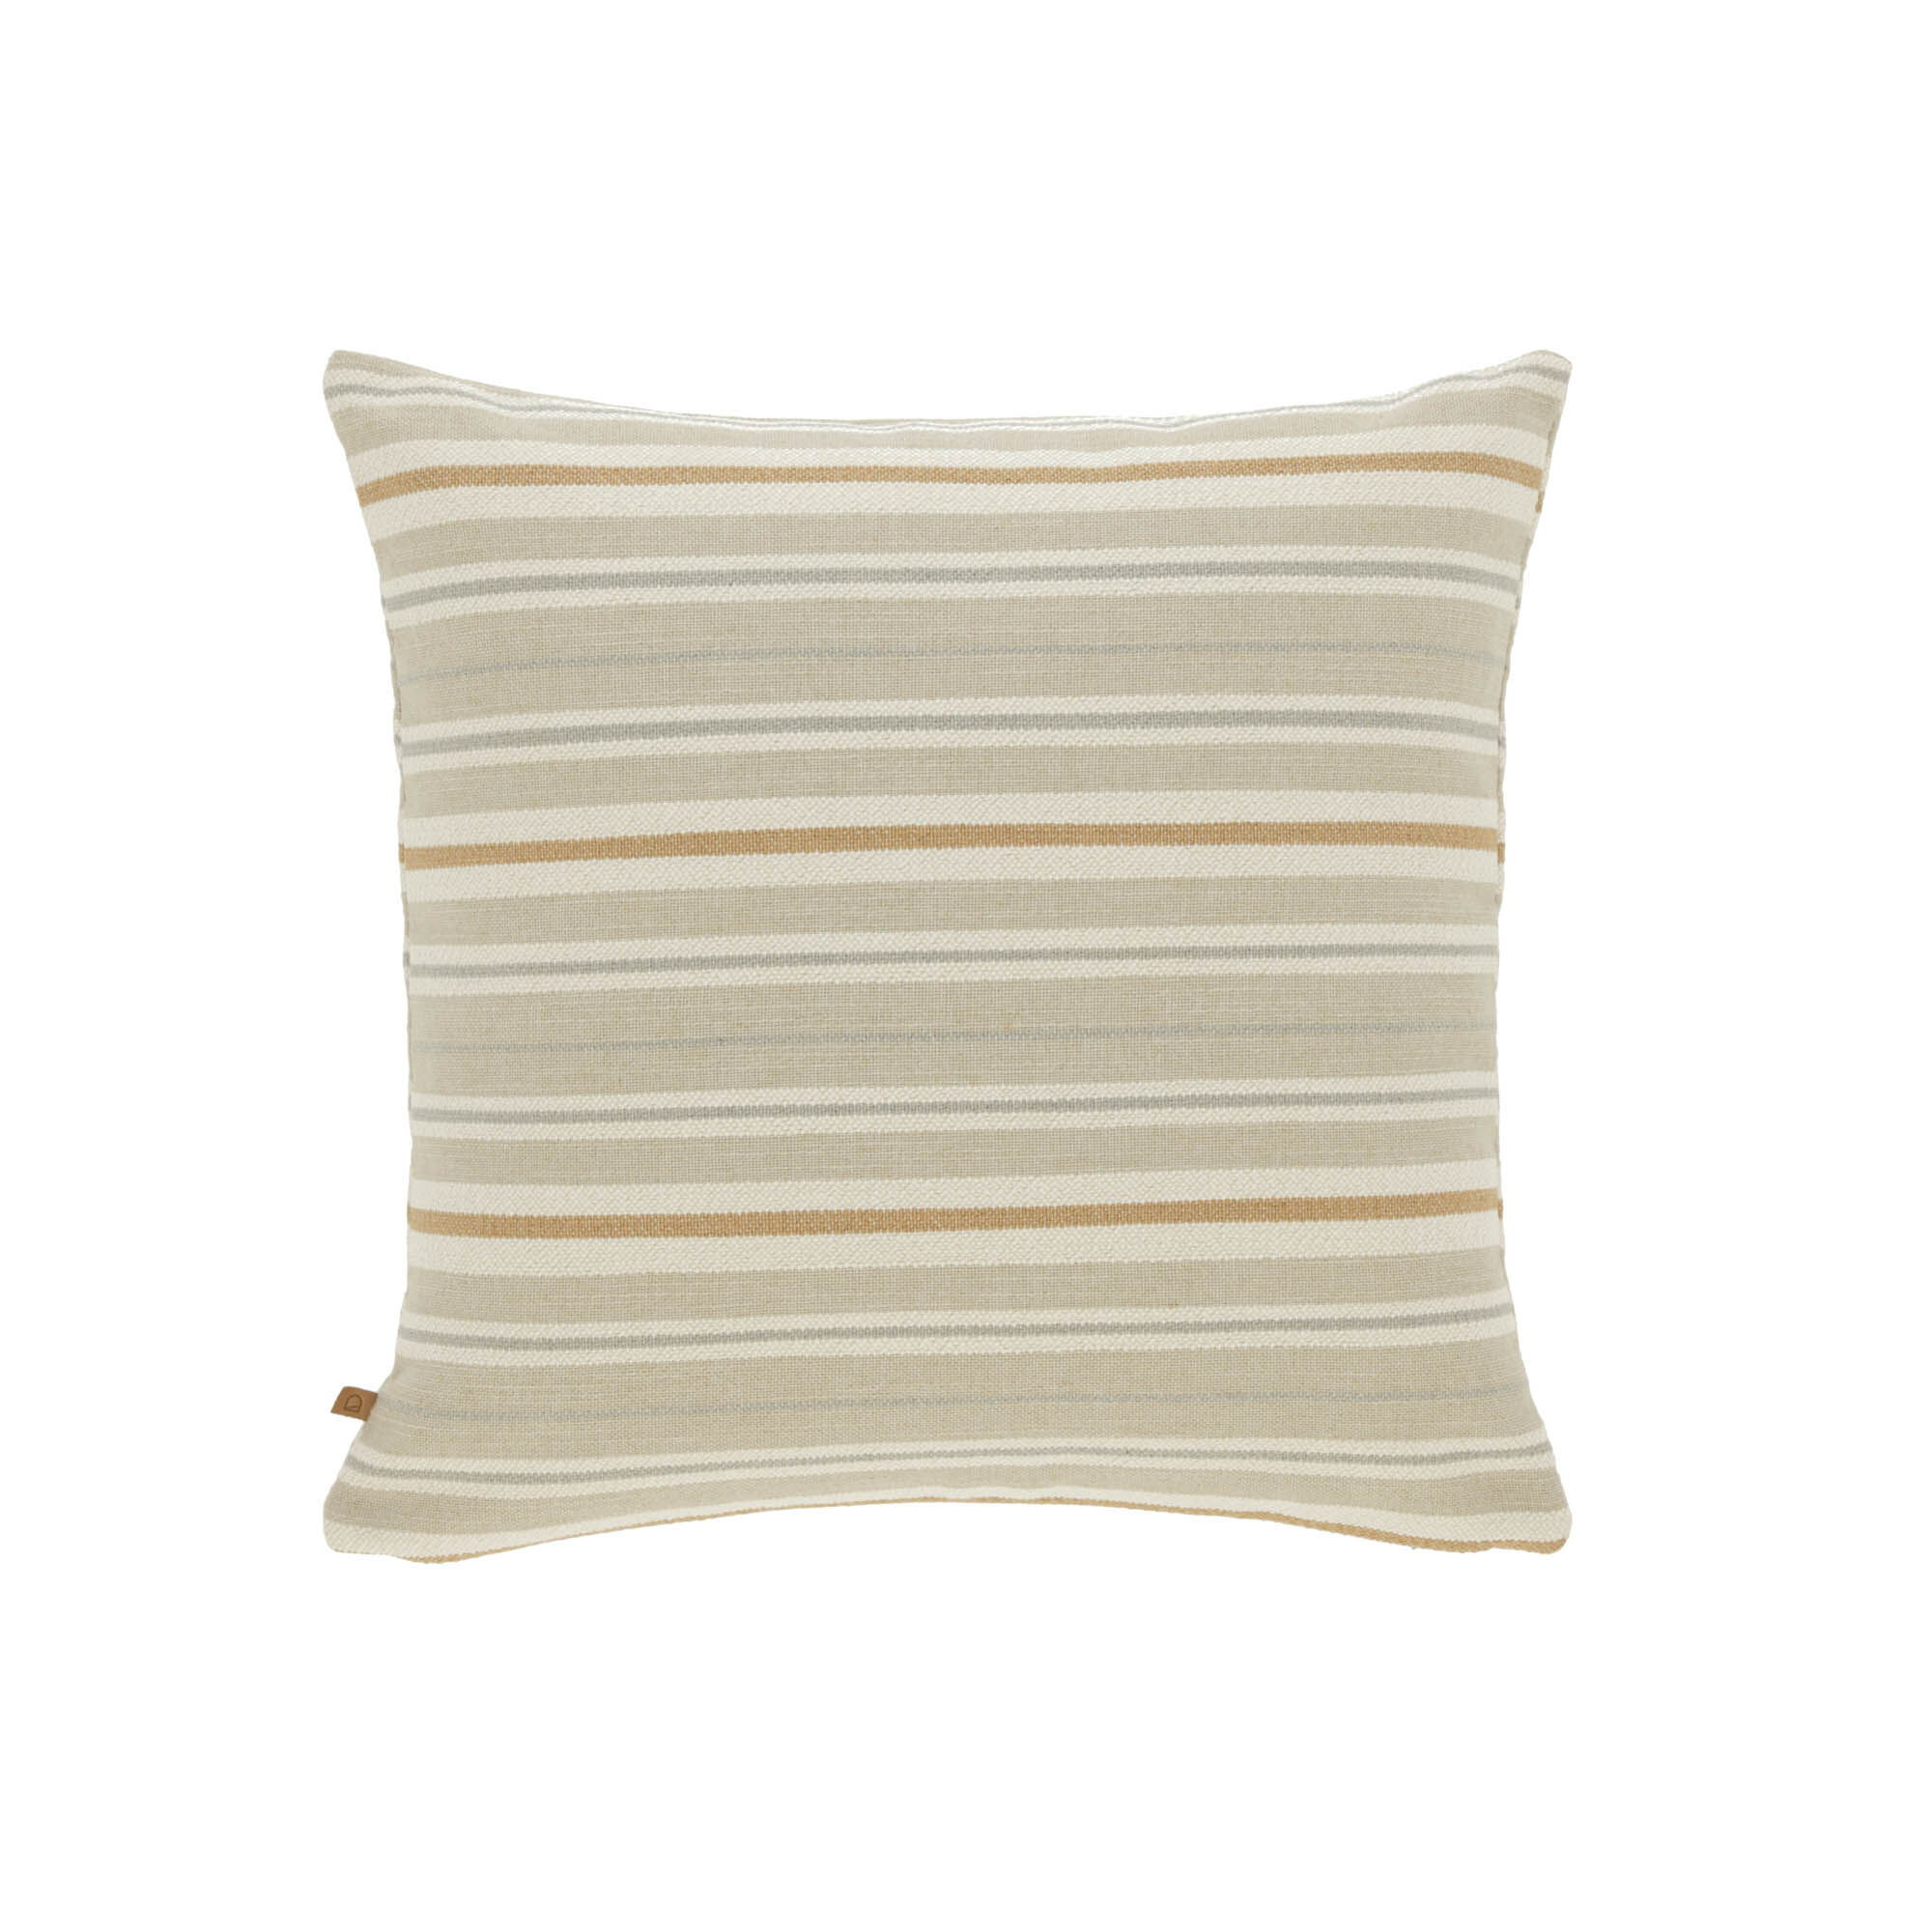 Kave Home Sydelle cushion cover mustard stripes 45 x 45 cm